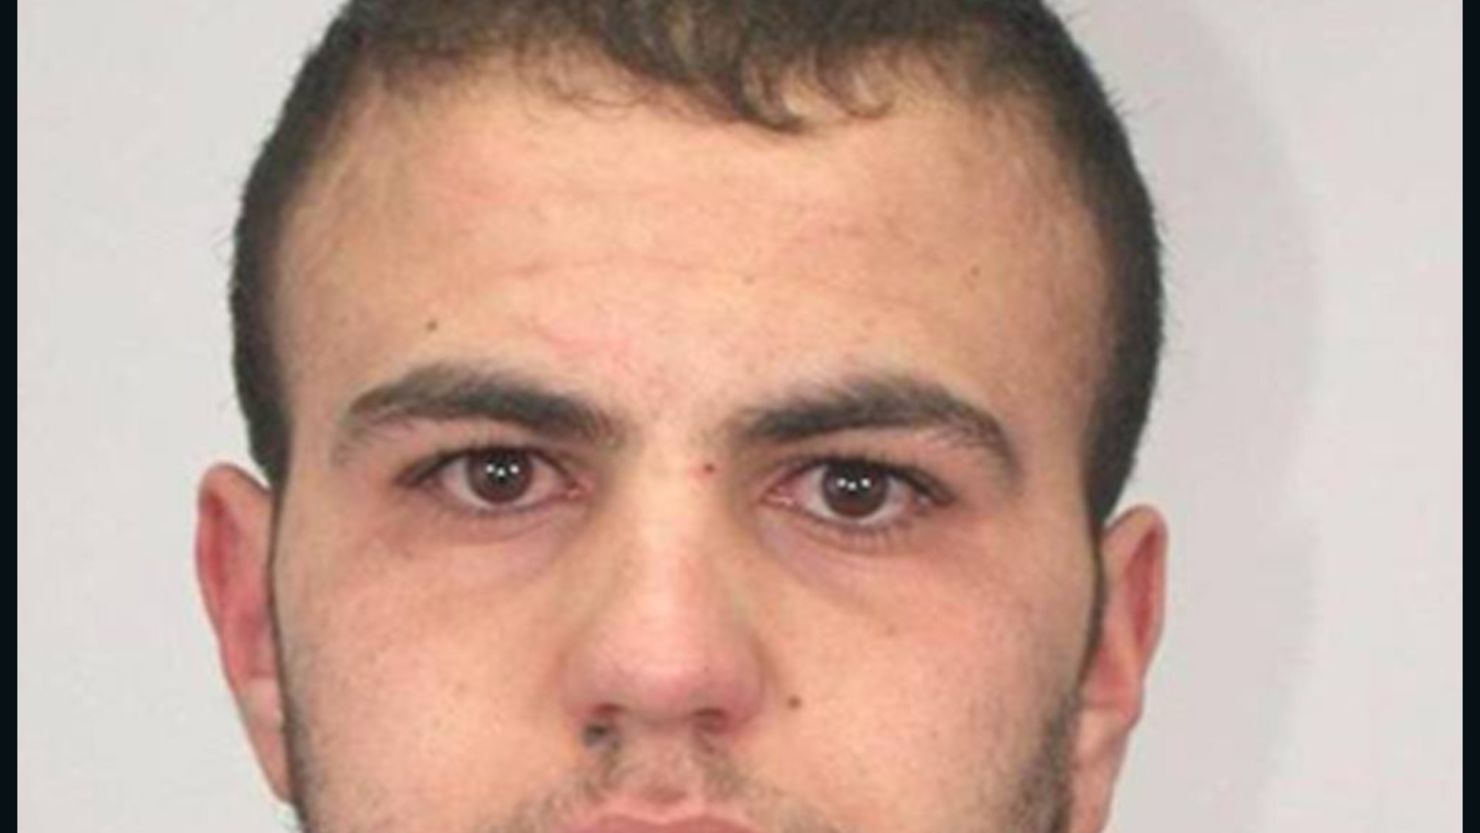 Yassin Ahmed Laarbi, a Spaniard, was arrested in the Spanish enclave of Ceuta on Morocco's north coast.